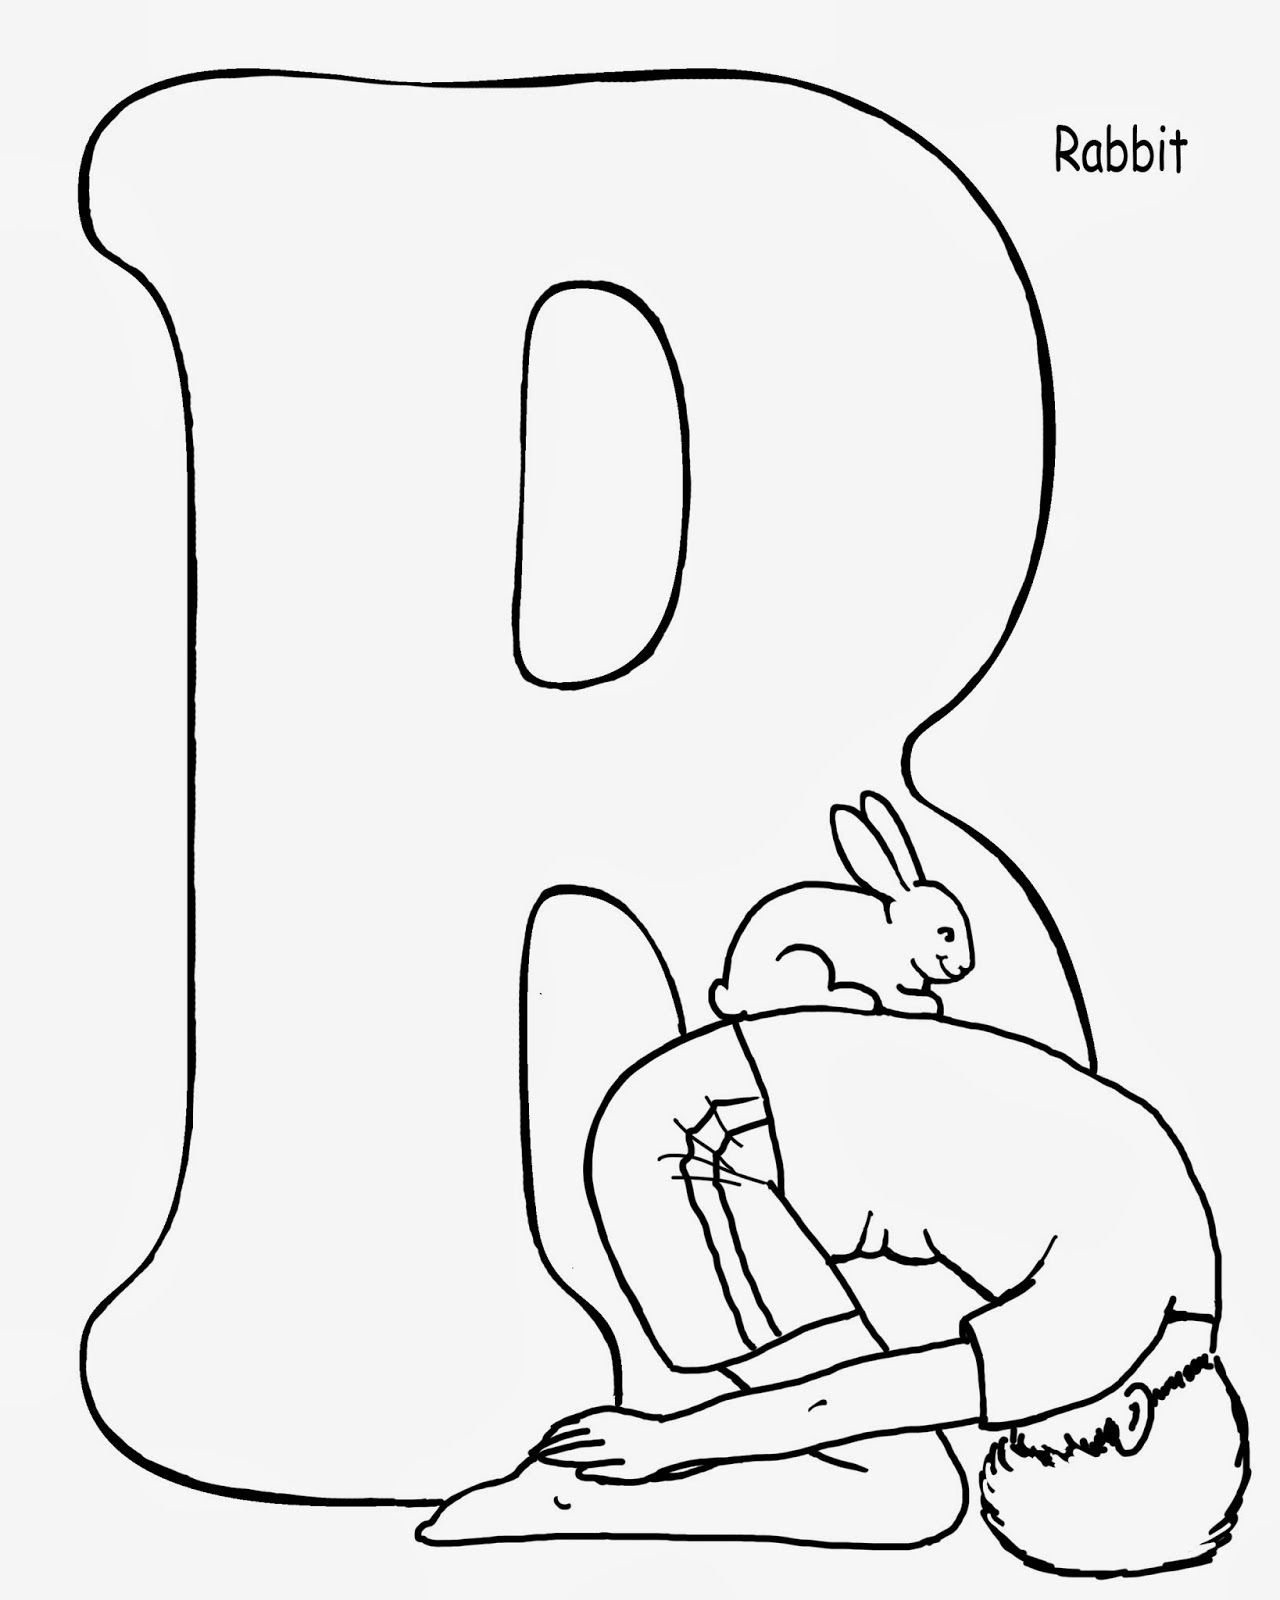 R is for Rabbit! | elephant journal